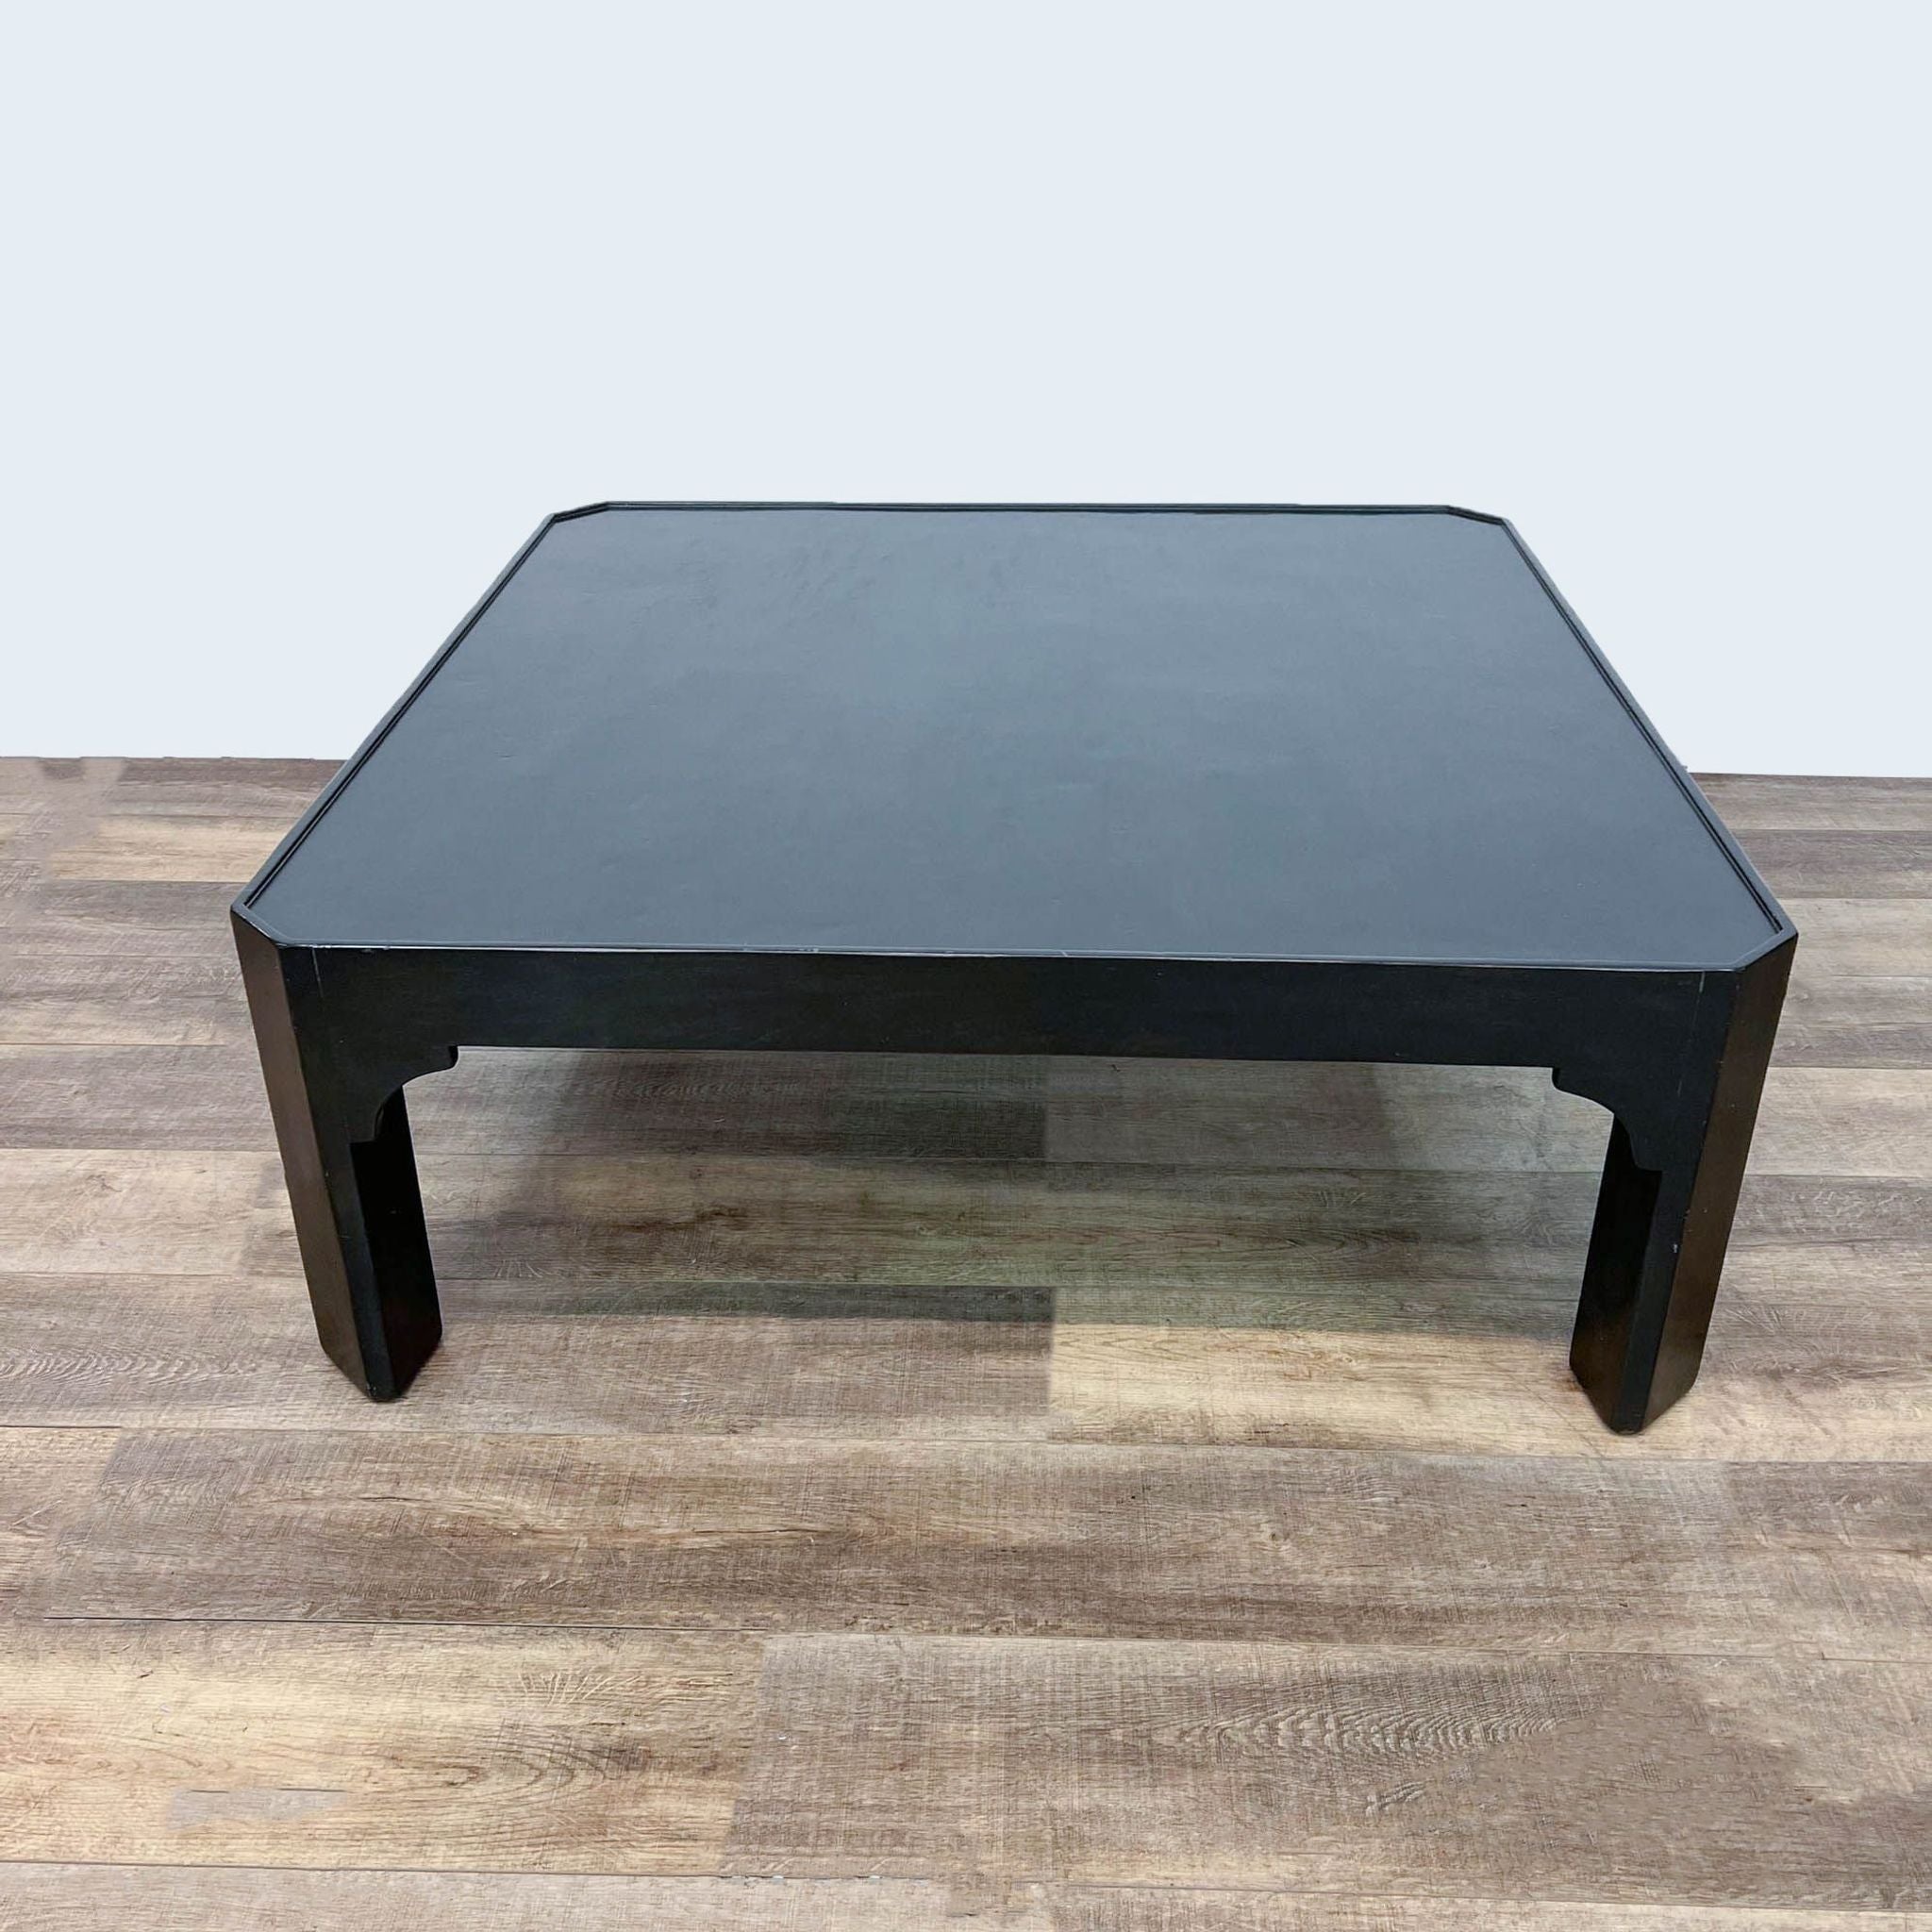 Square black coffee table by Dennis & Leen, with a minimalistic design, set against a neutral backdrop.